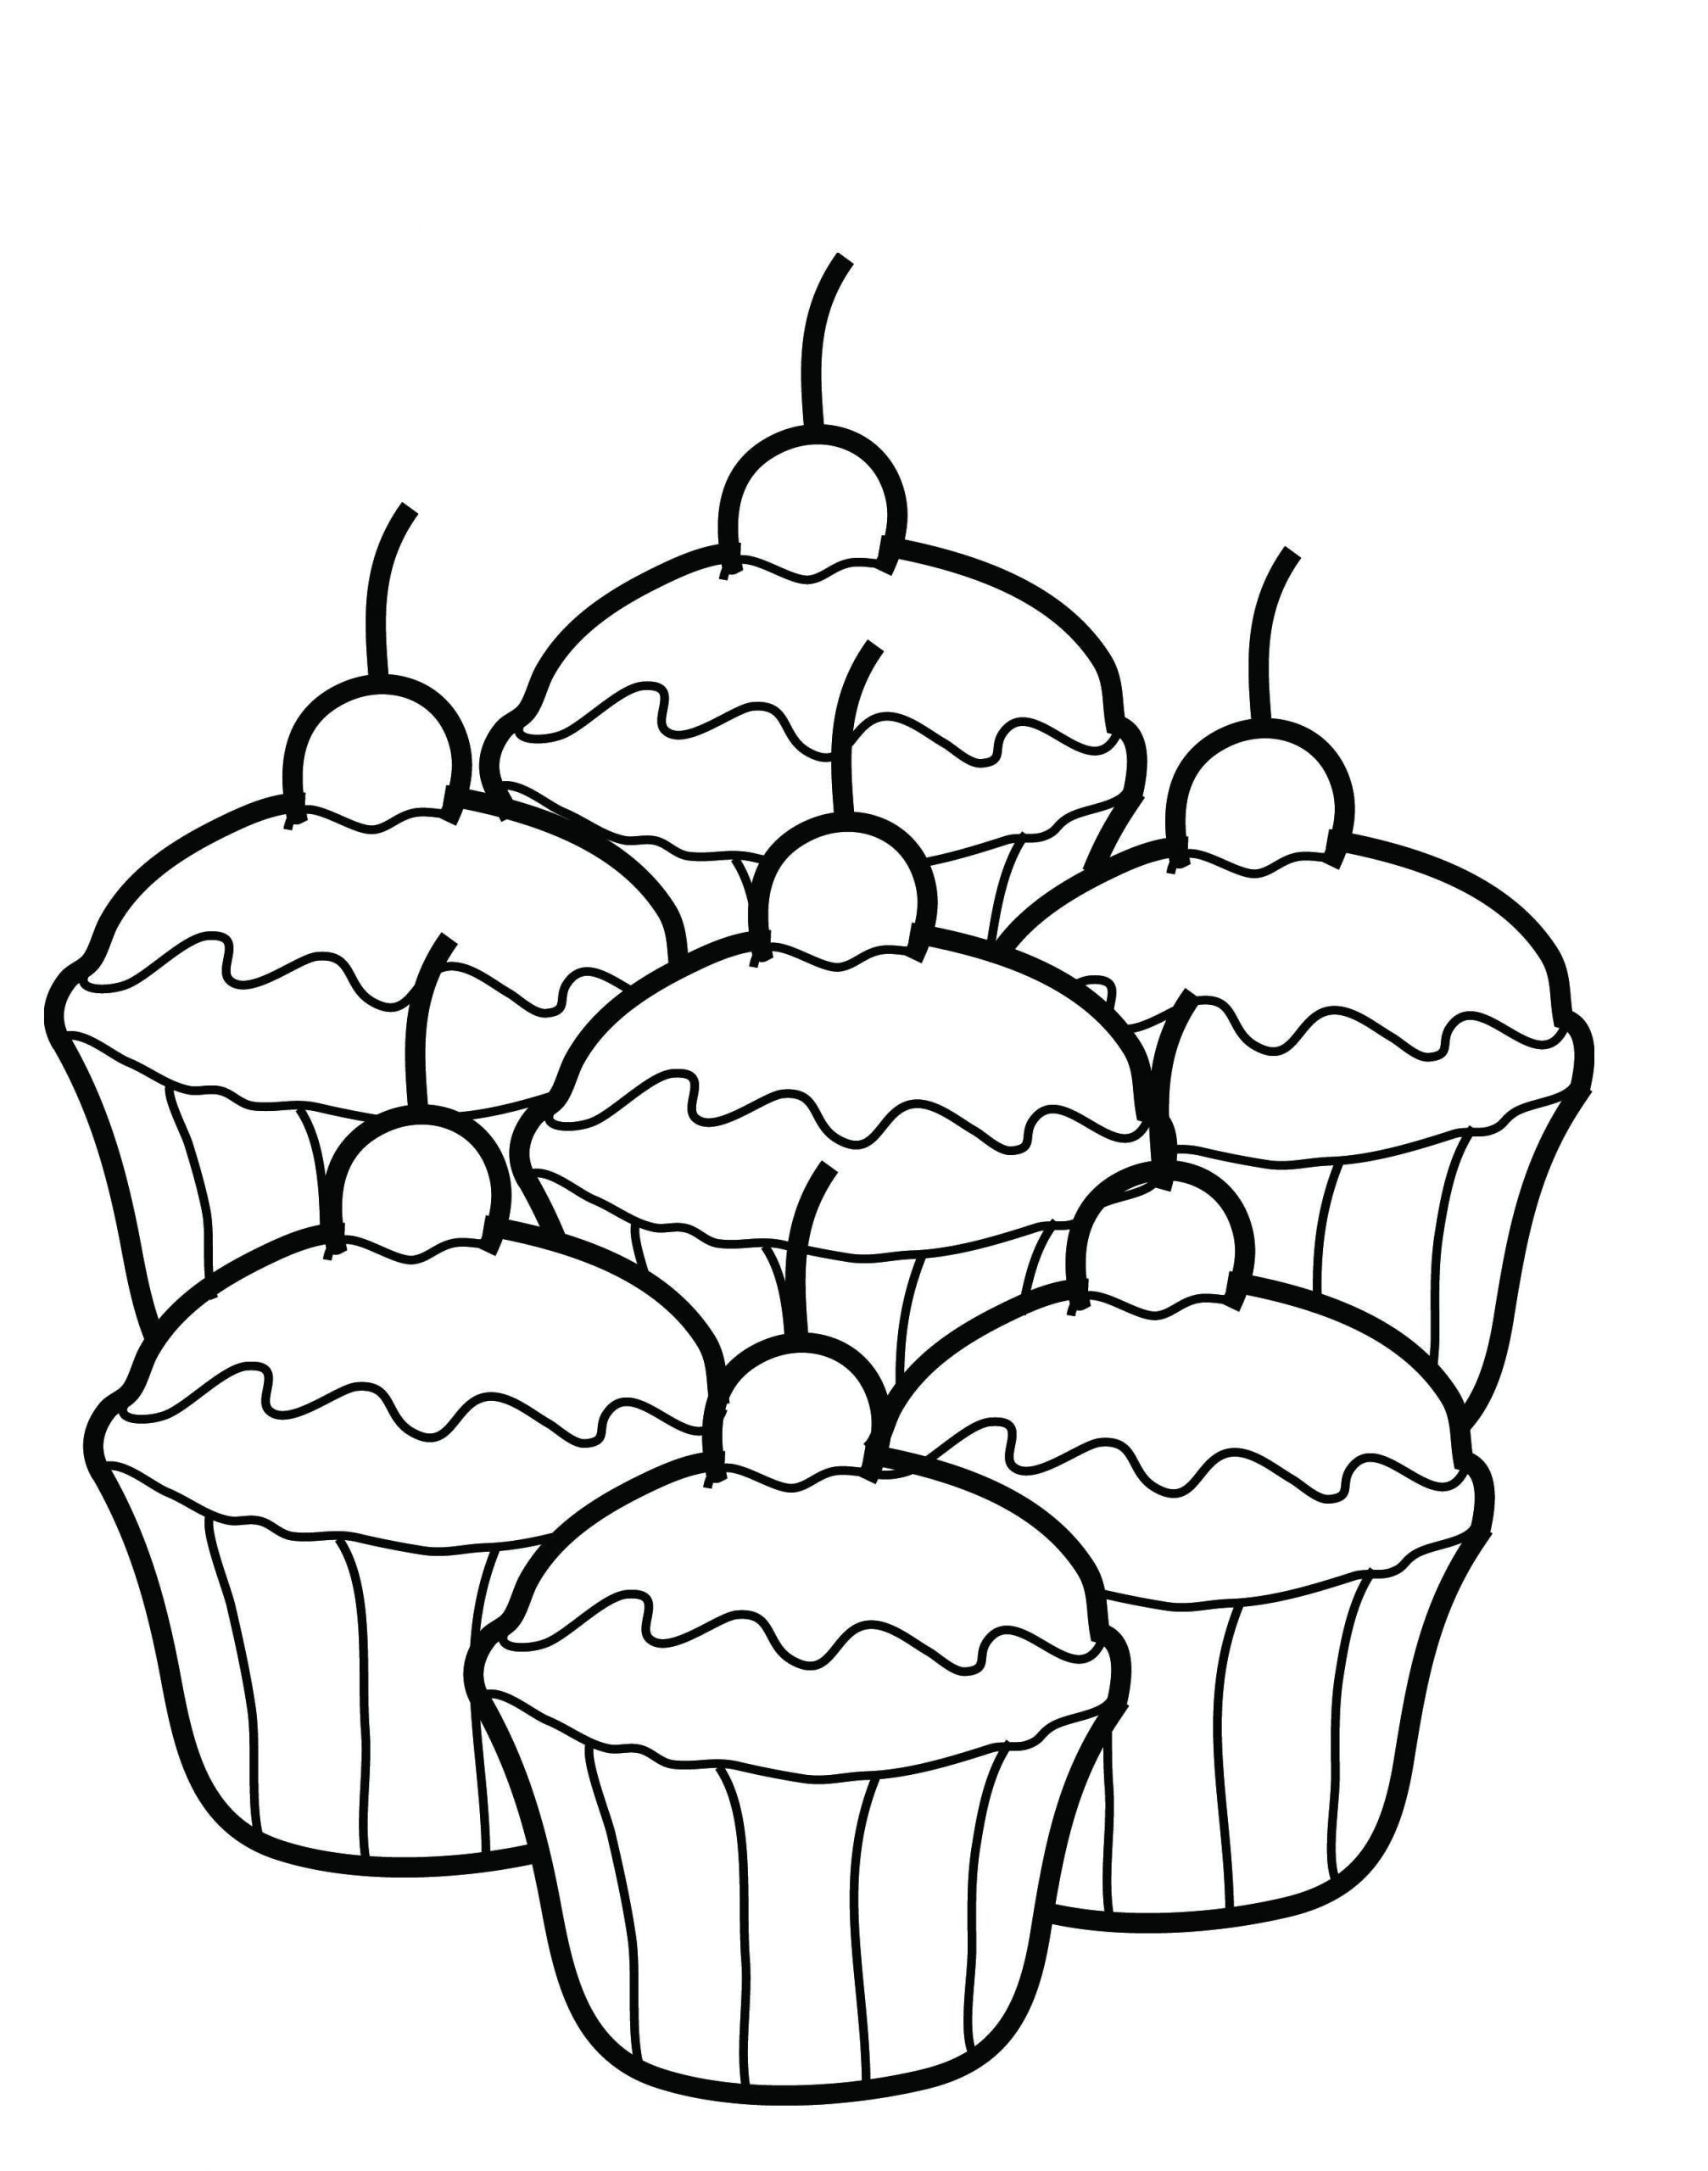 Free Dessert Coloring Pages